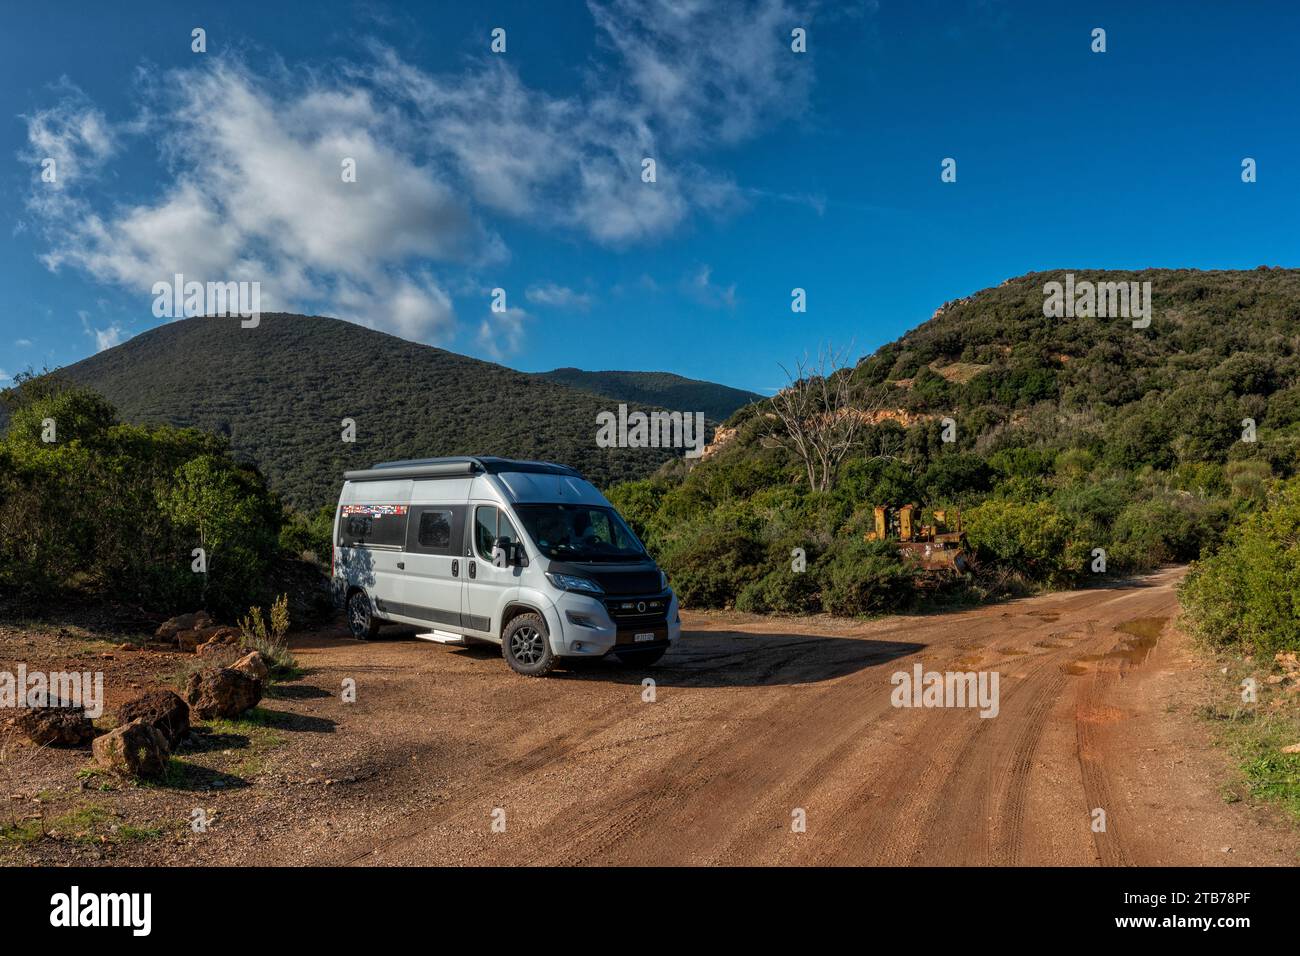 A gray campervan parked on a dirt road in the green hills of Elba under a blue sky Stock Photo